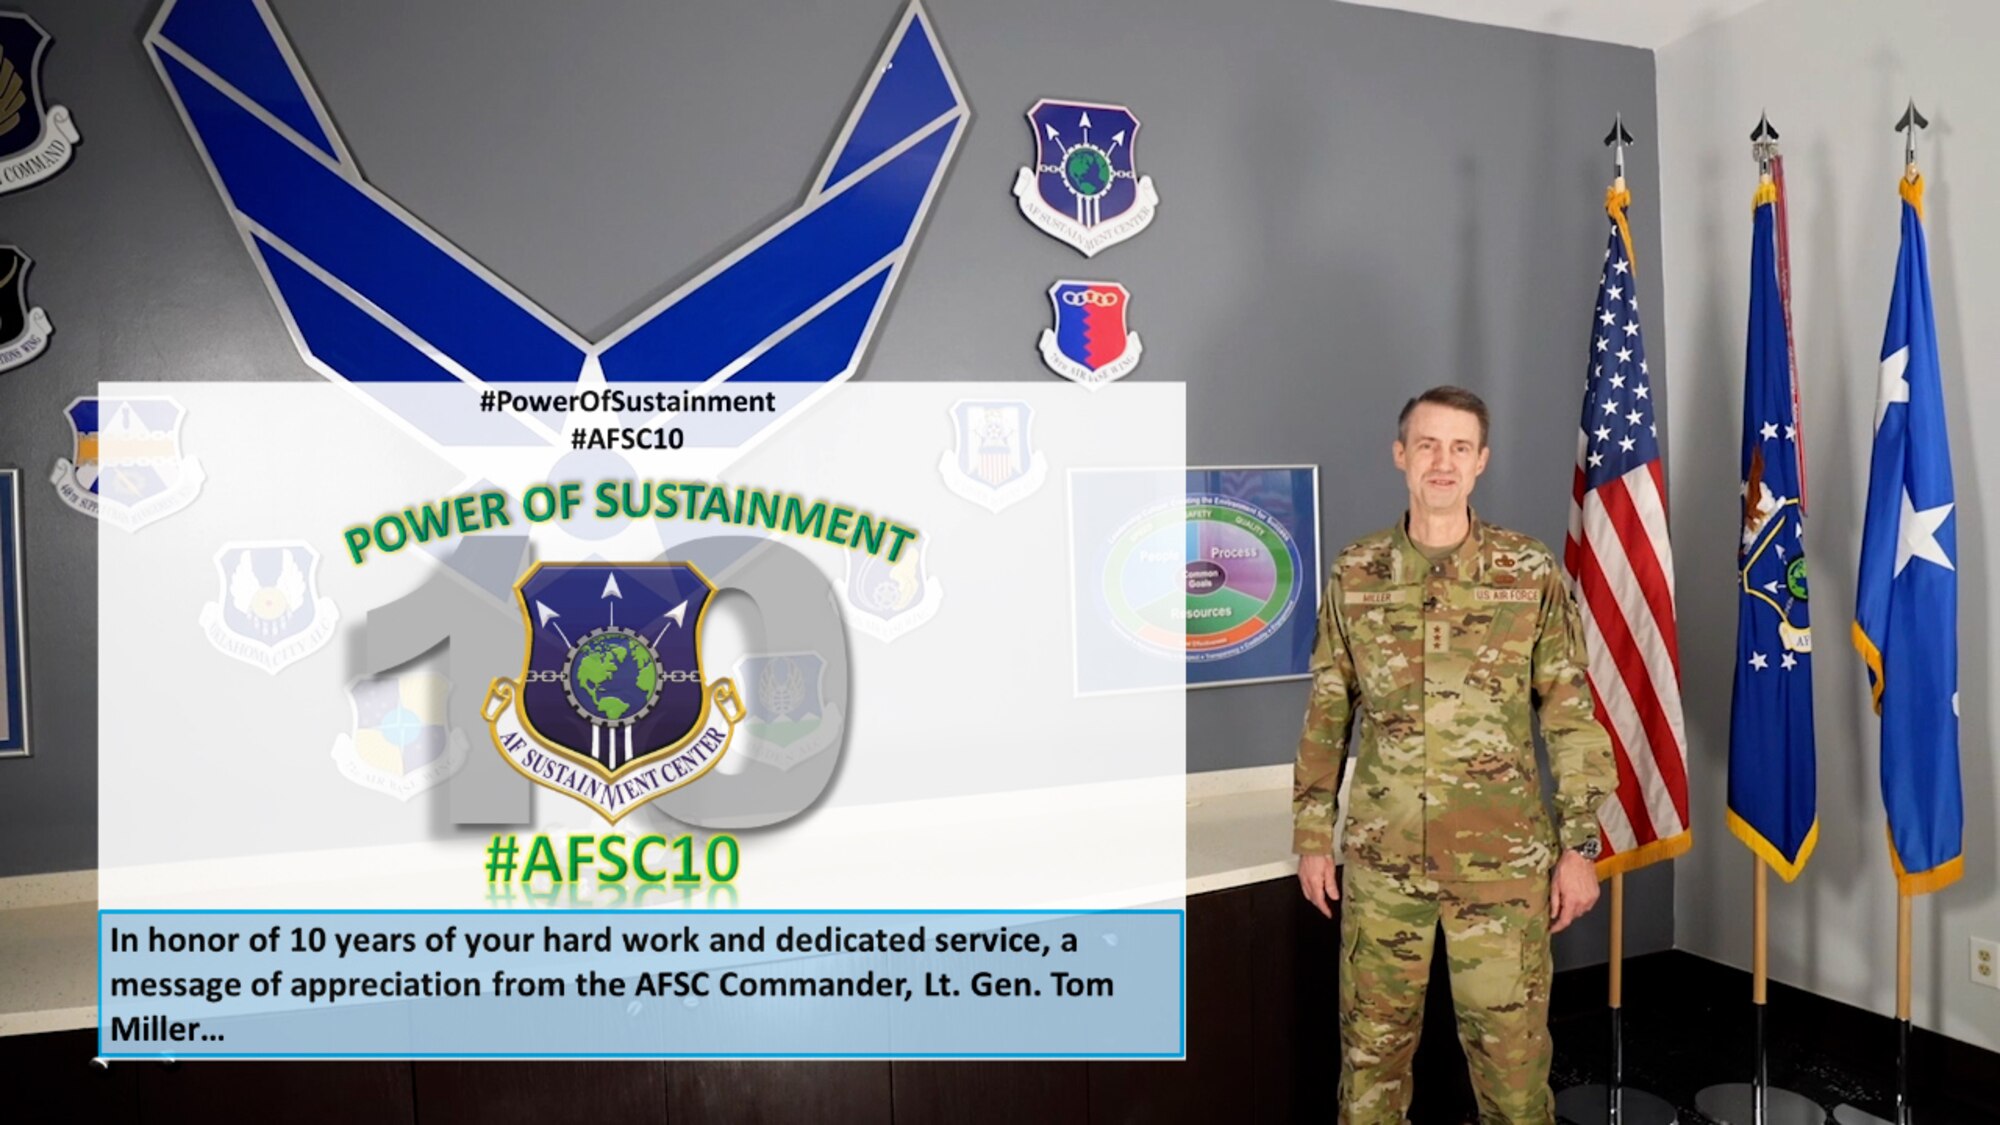 Lt. Gen. Tom Miller, AFSC commander, recognizes the hard work of the 40,000+ personnel who provide sustainment and logistics readiness to deliver combat power to America.